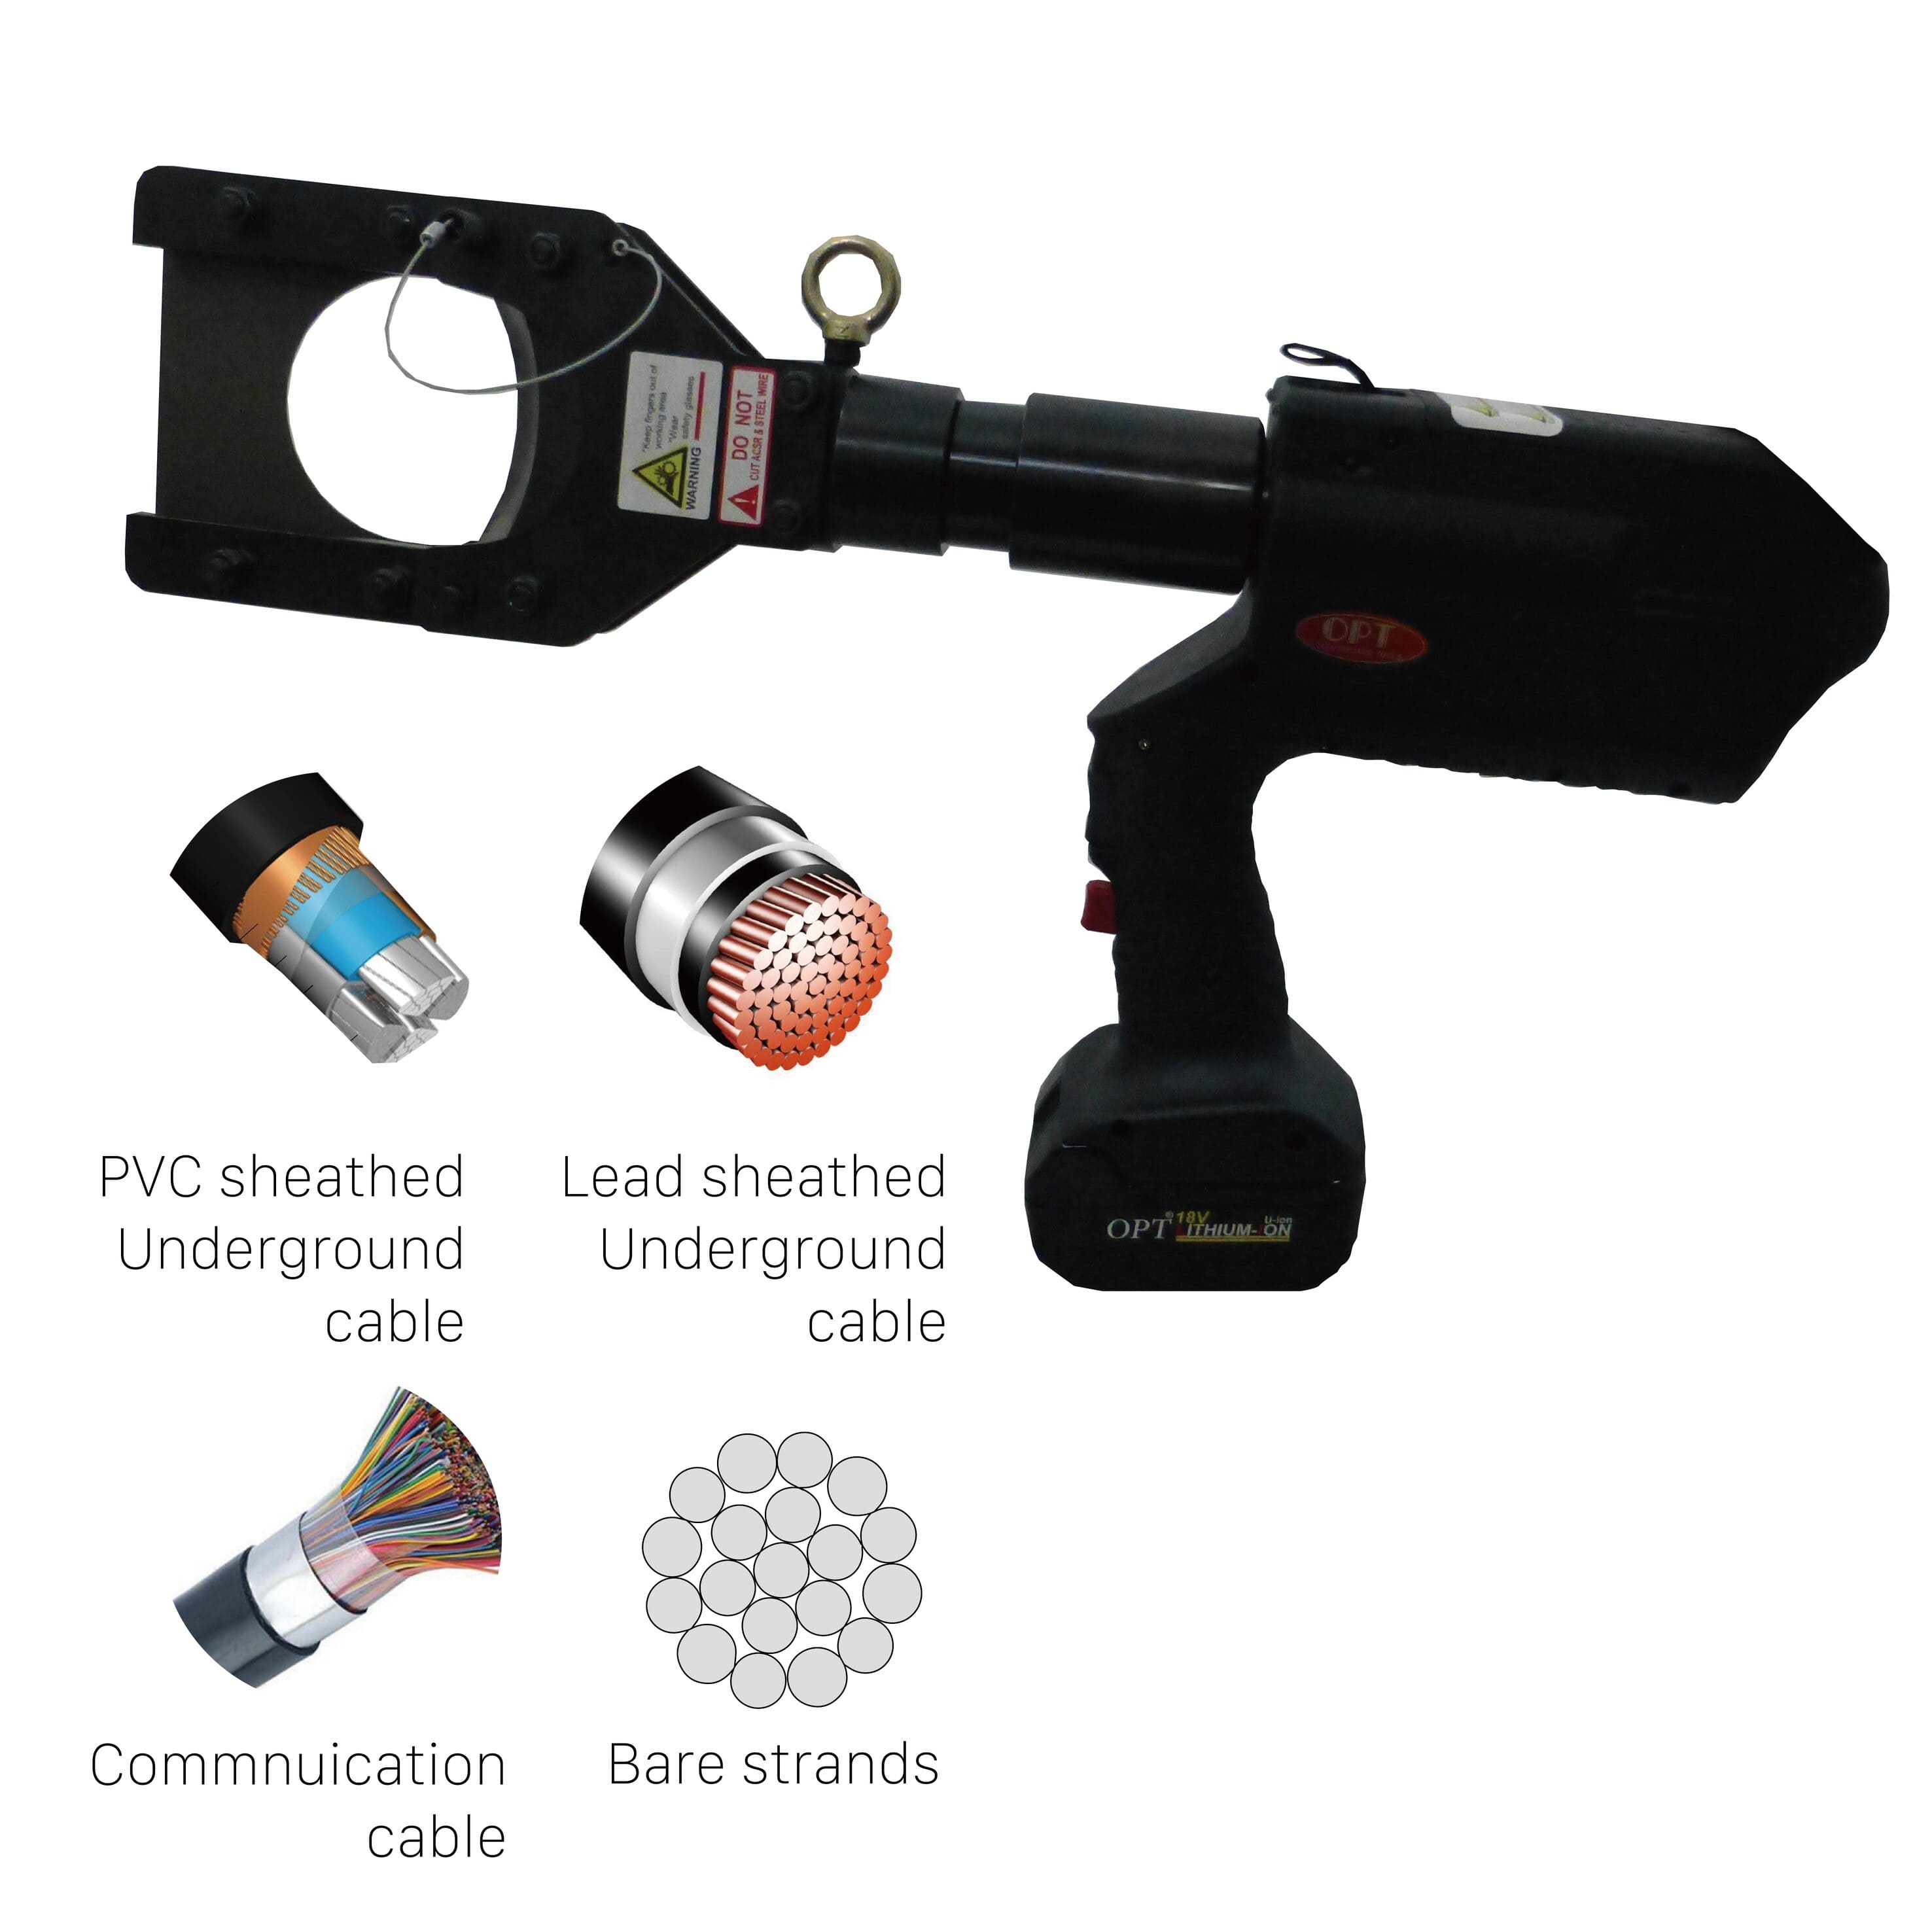 ECB-85 CORDLESS HYDRAULIC CABLE CUTTERS